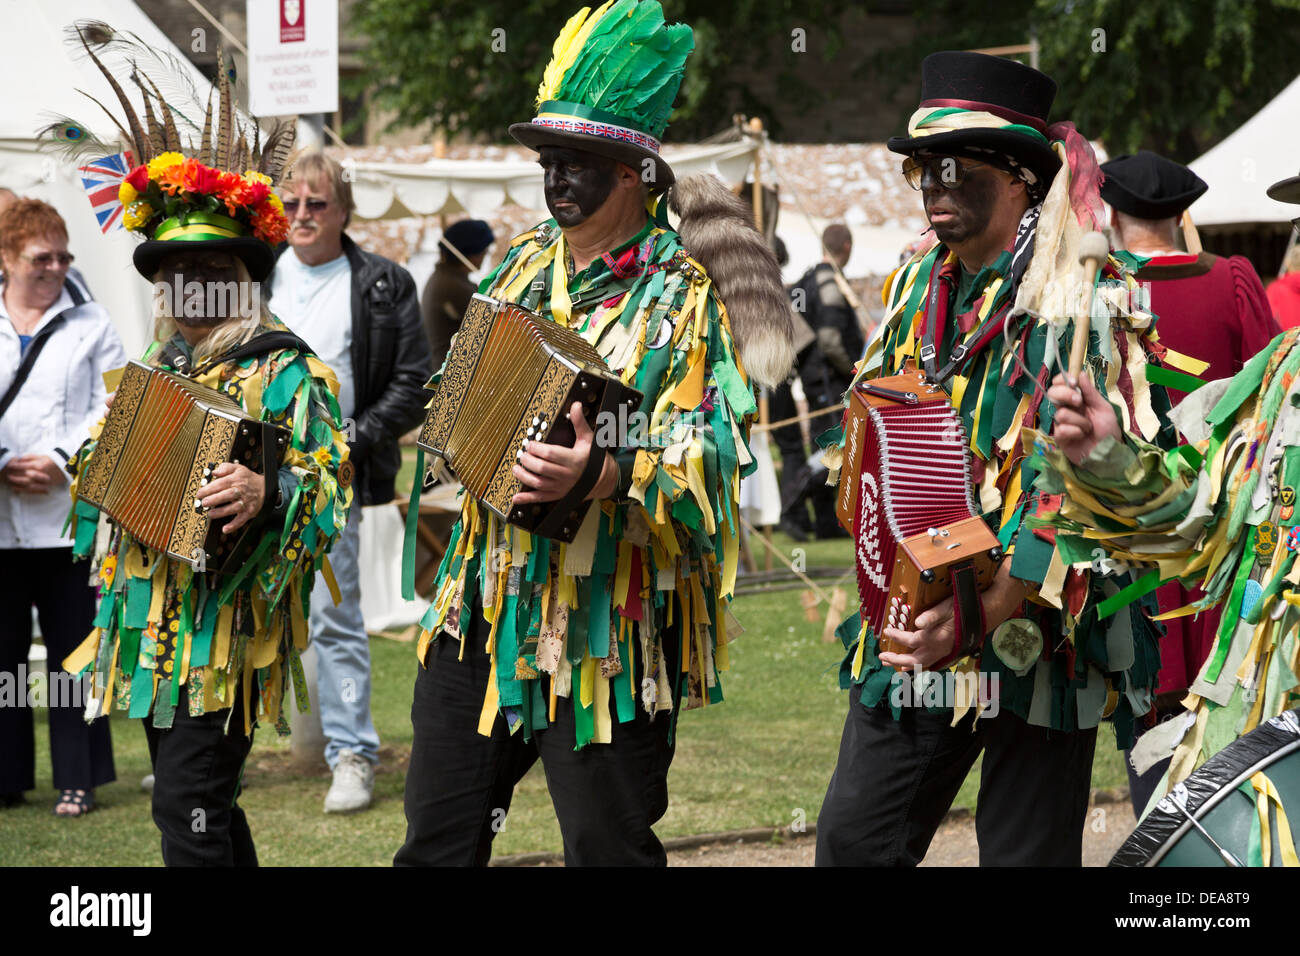 Morris dancers with black painted faces playing Dino Baffetti accordions, Peterborough Heritage Festival 22 June 2013, England Stock Photo